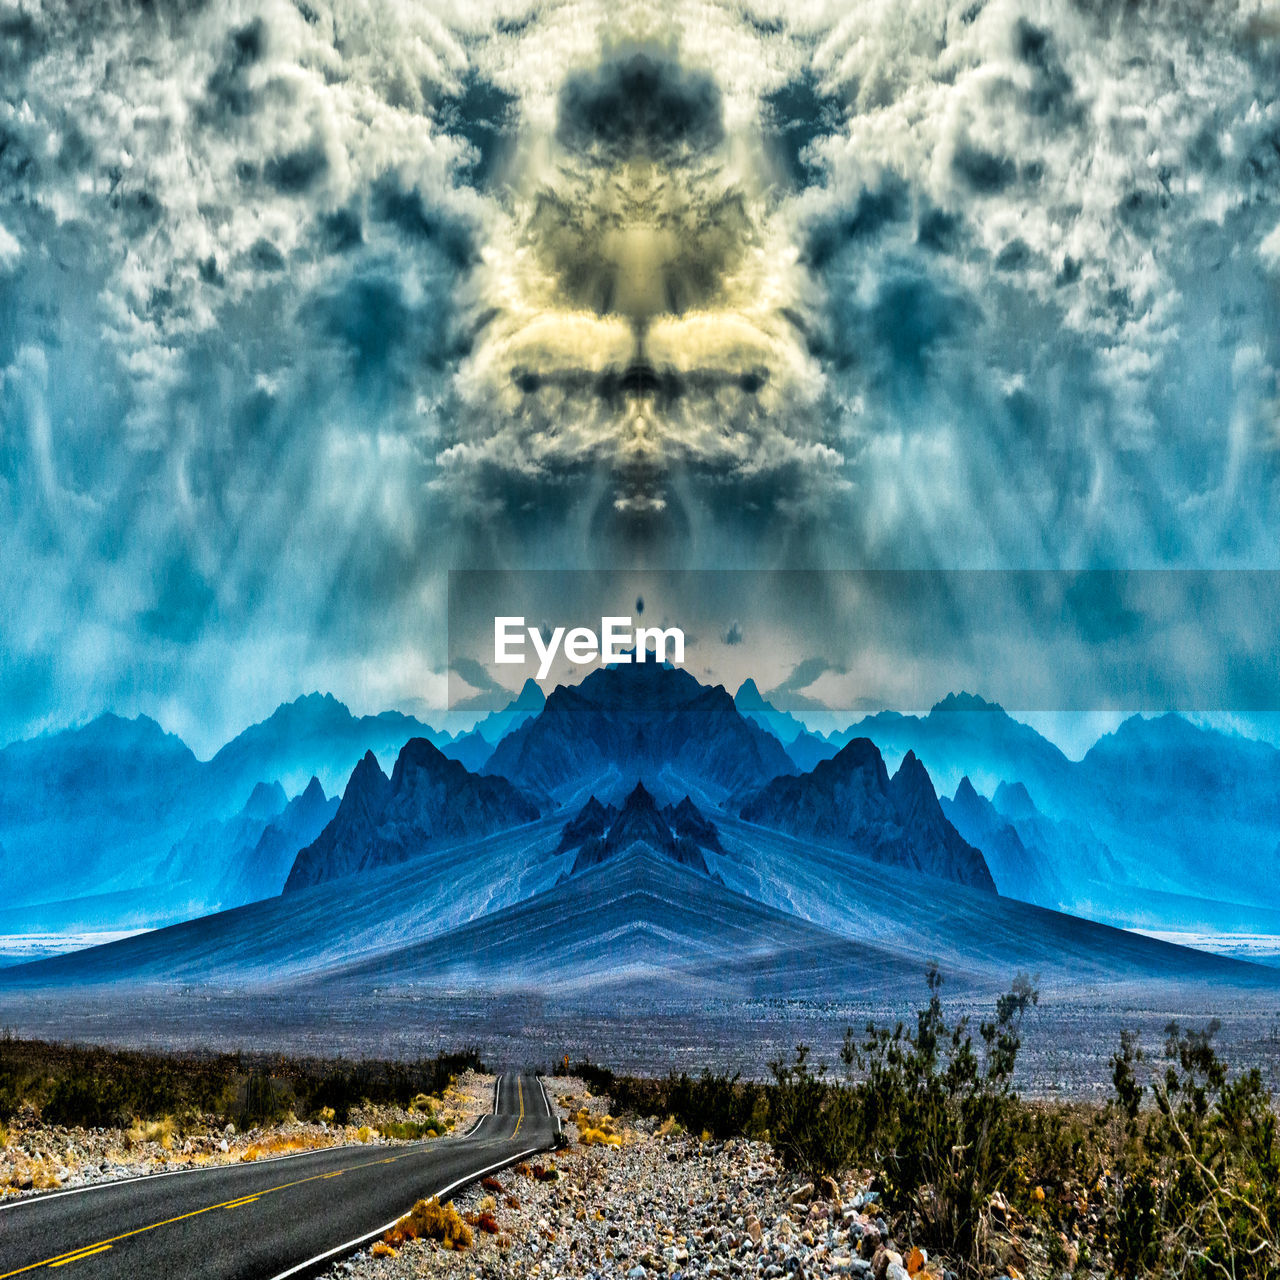 DIGITAL COMPOSITE IMAGE OF MOUNTAINS AGAINST SKY